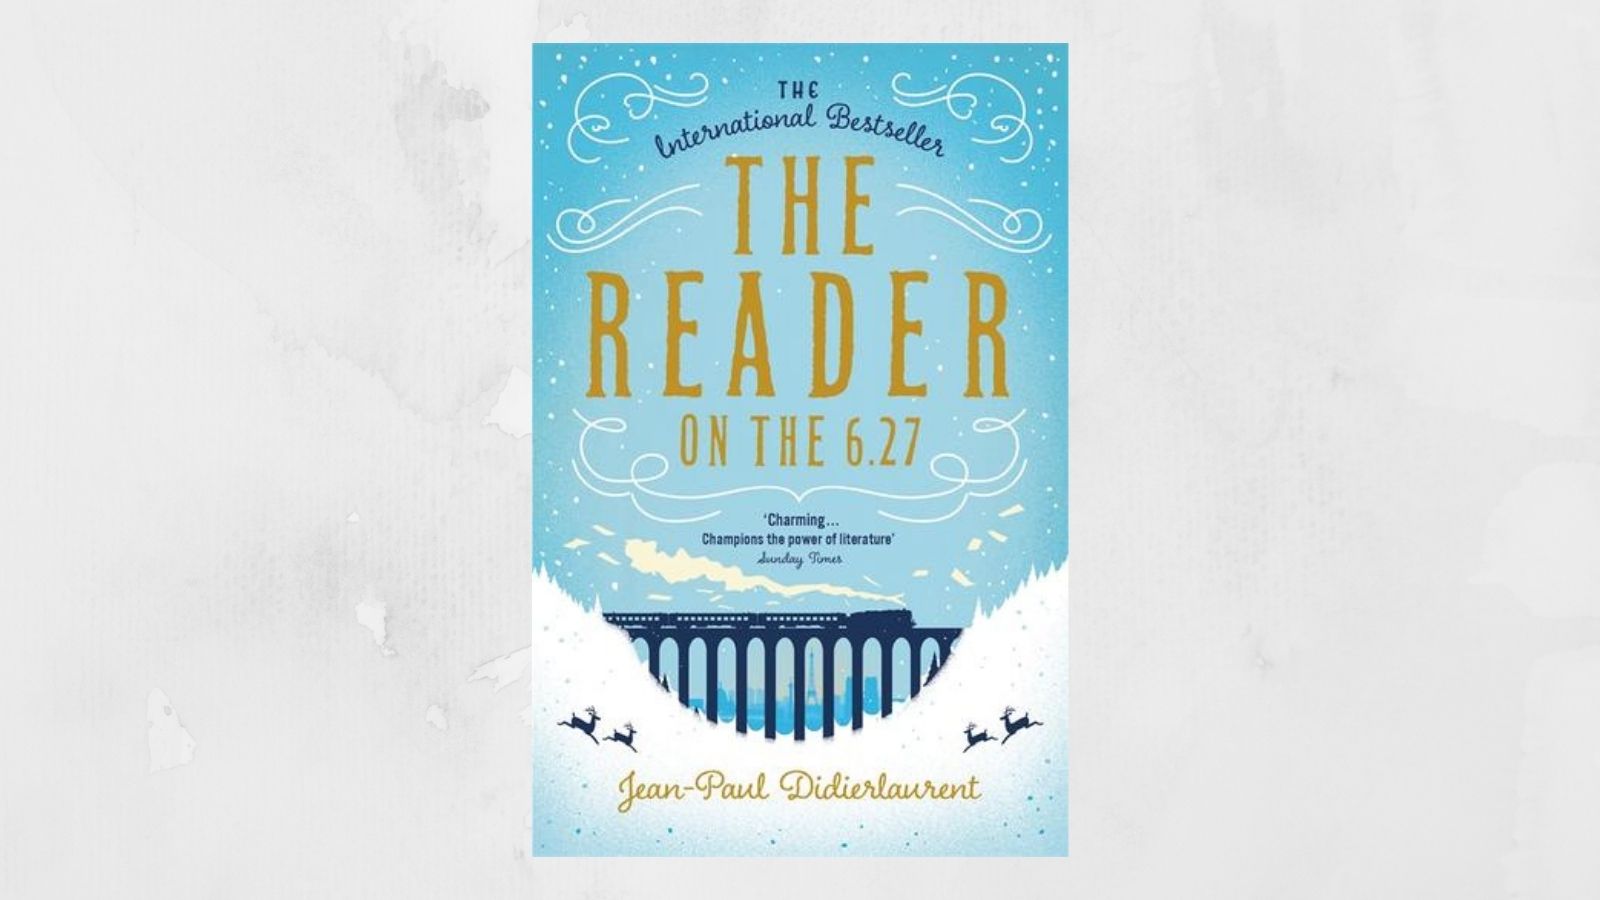 The Reader on the 6.27 book cover